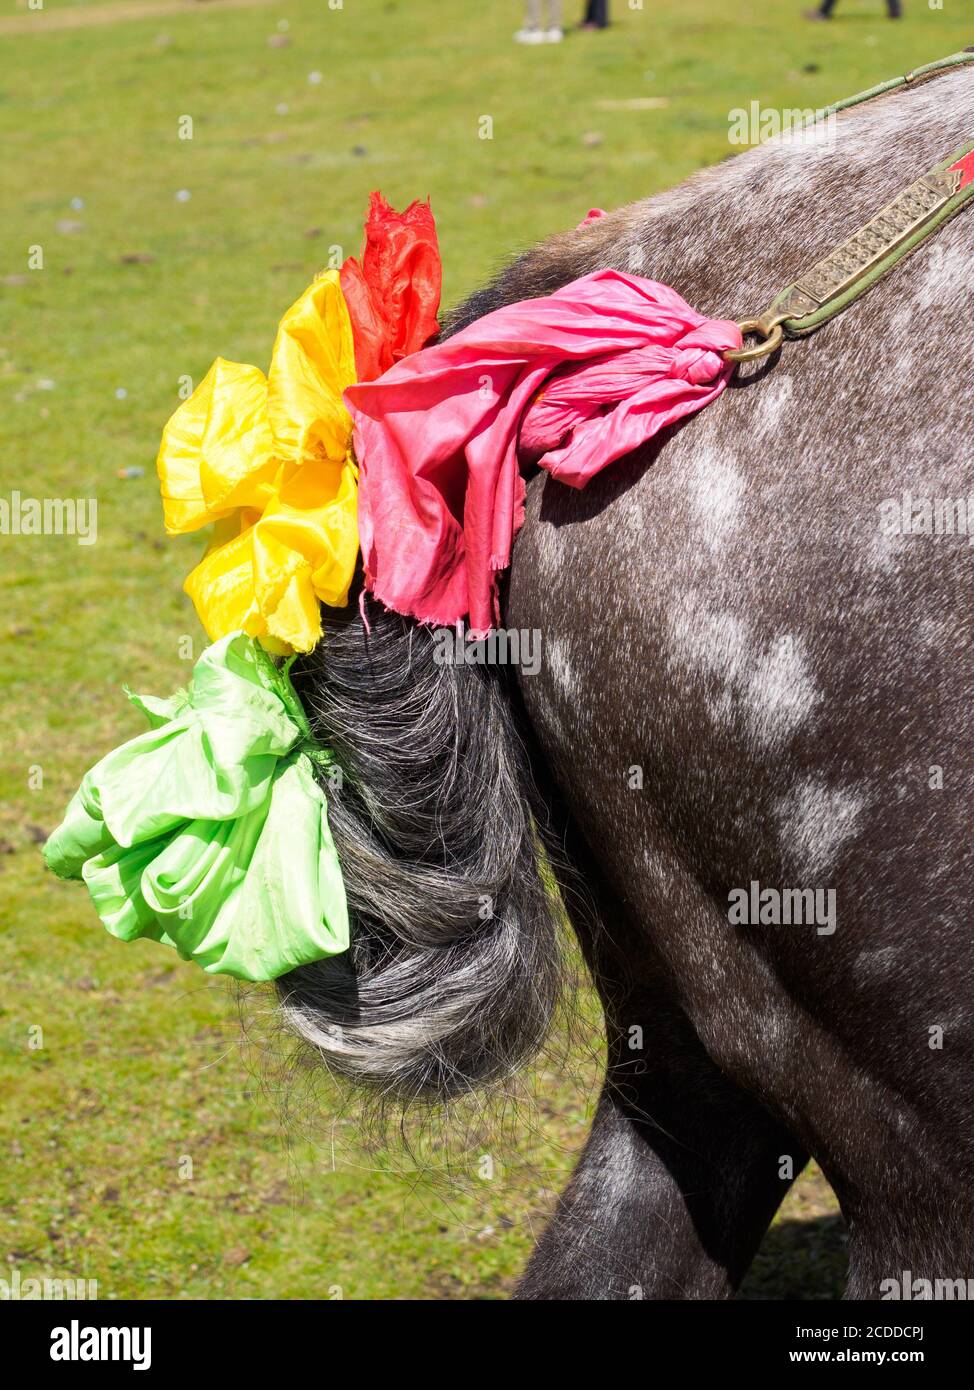 The racing horse was beautified during the horse festival of Khampas, near Litang City. Stock Photo